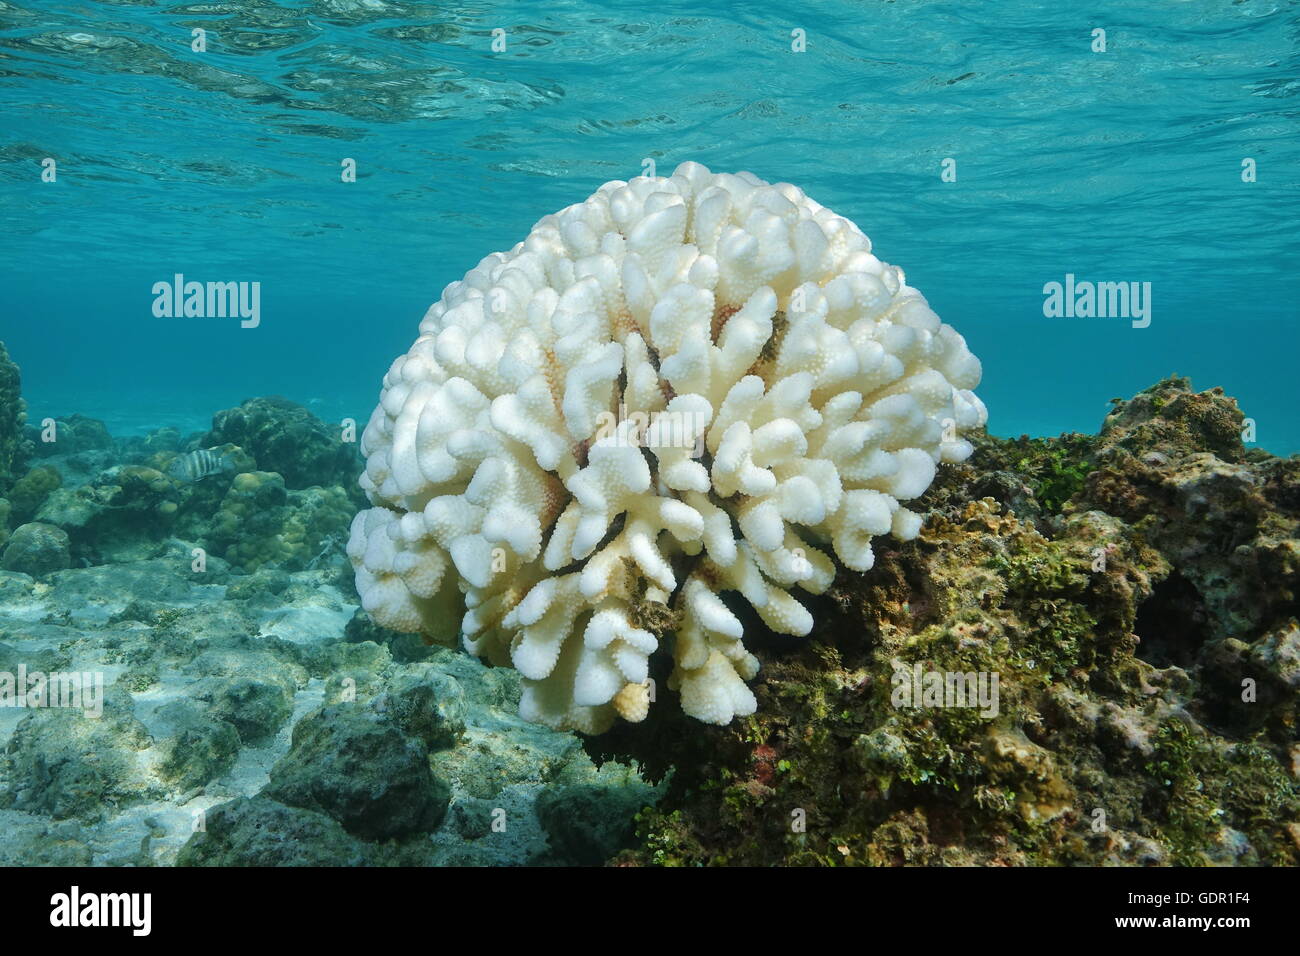 Coral bleaching, Pocillopora coral bleached on the reef flat, due to El Nino, Pacific ocean, French Polynesia Stock Photo